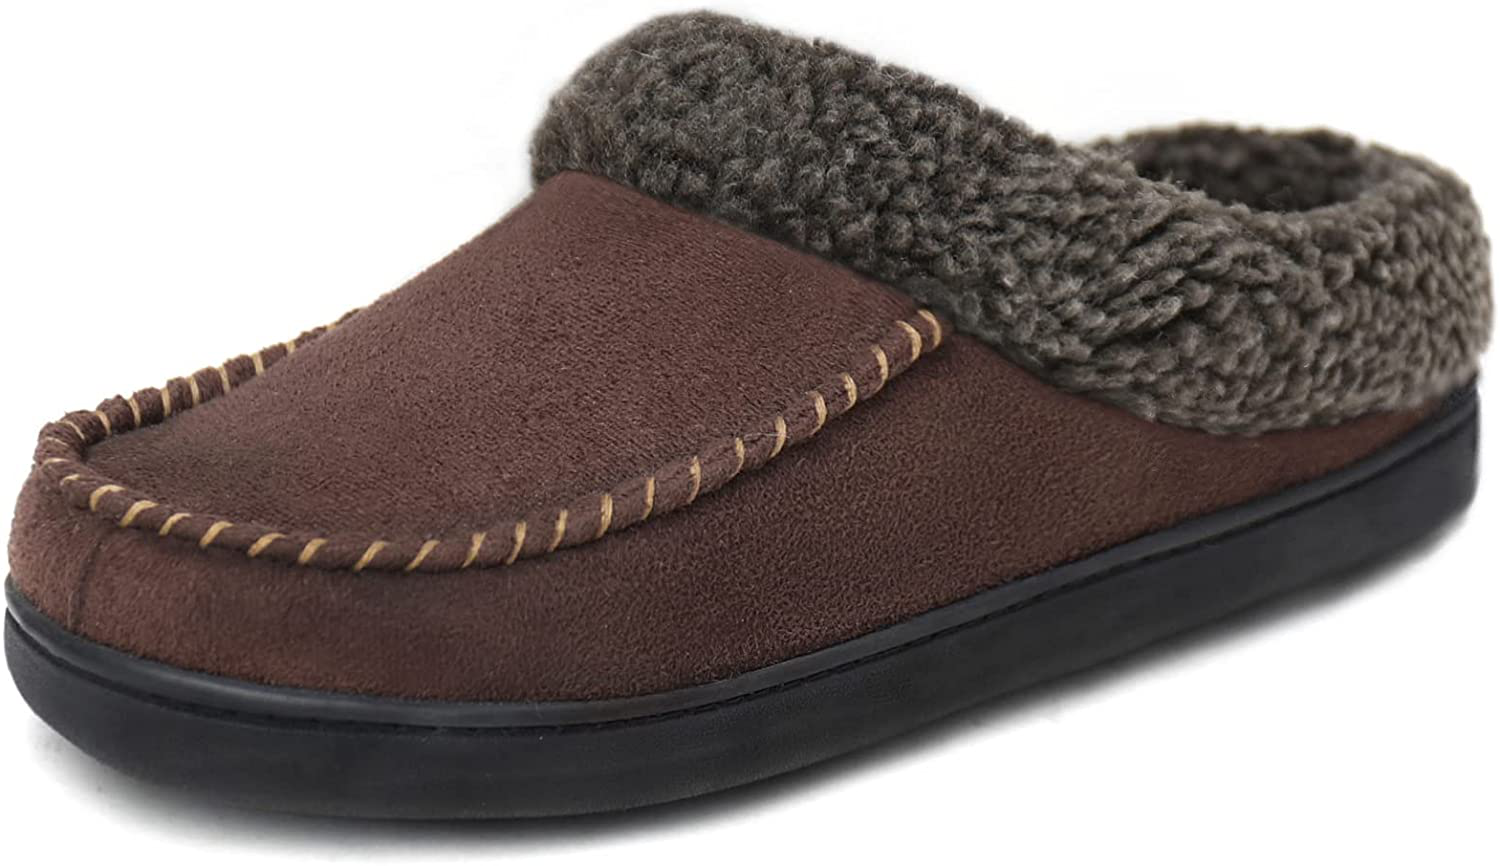 ULTRAIDEAS Men'S Moccasin Suede Slippers with Cozy Memory Foam & Fuzzy Plush Lining , Slip on Clog House Shoes with Indoor Outdoor Rubber Sole